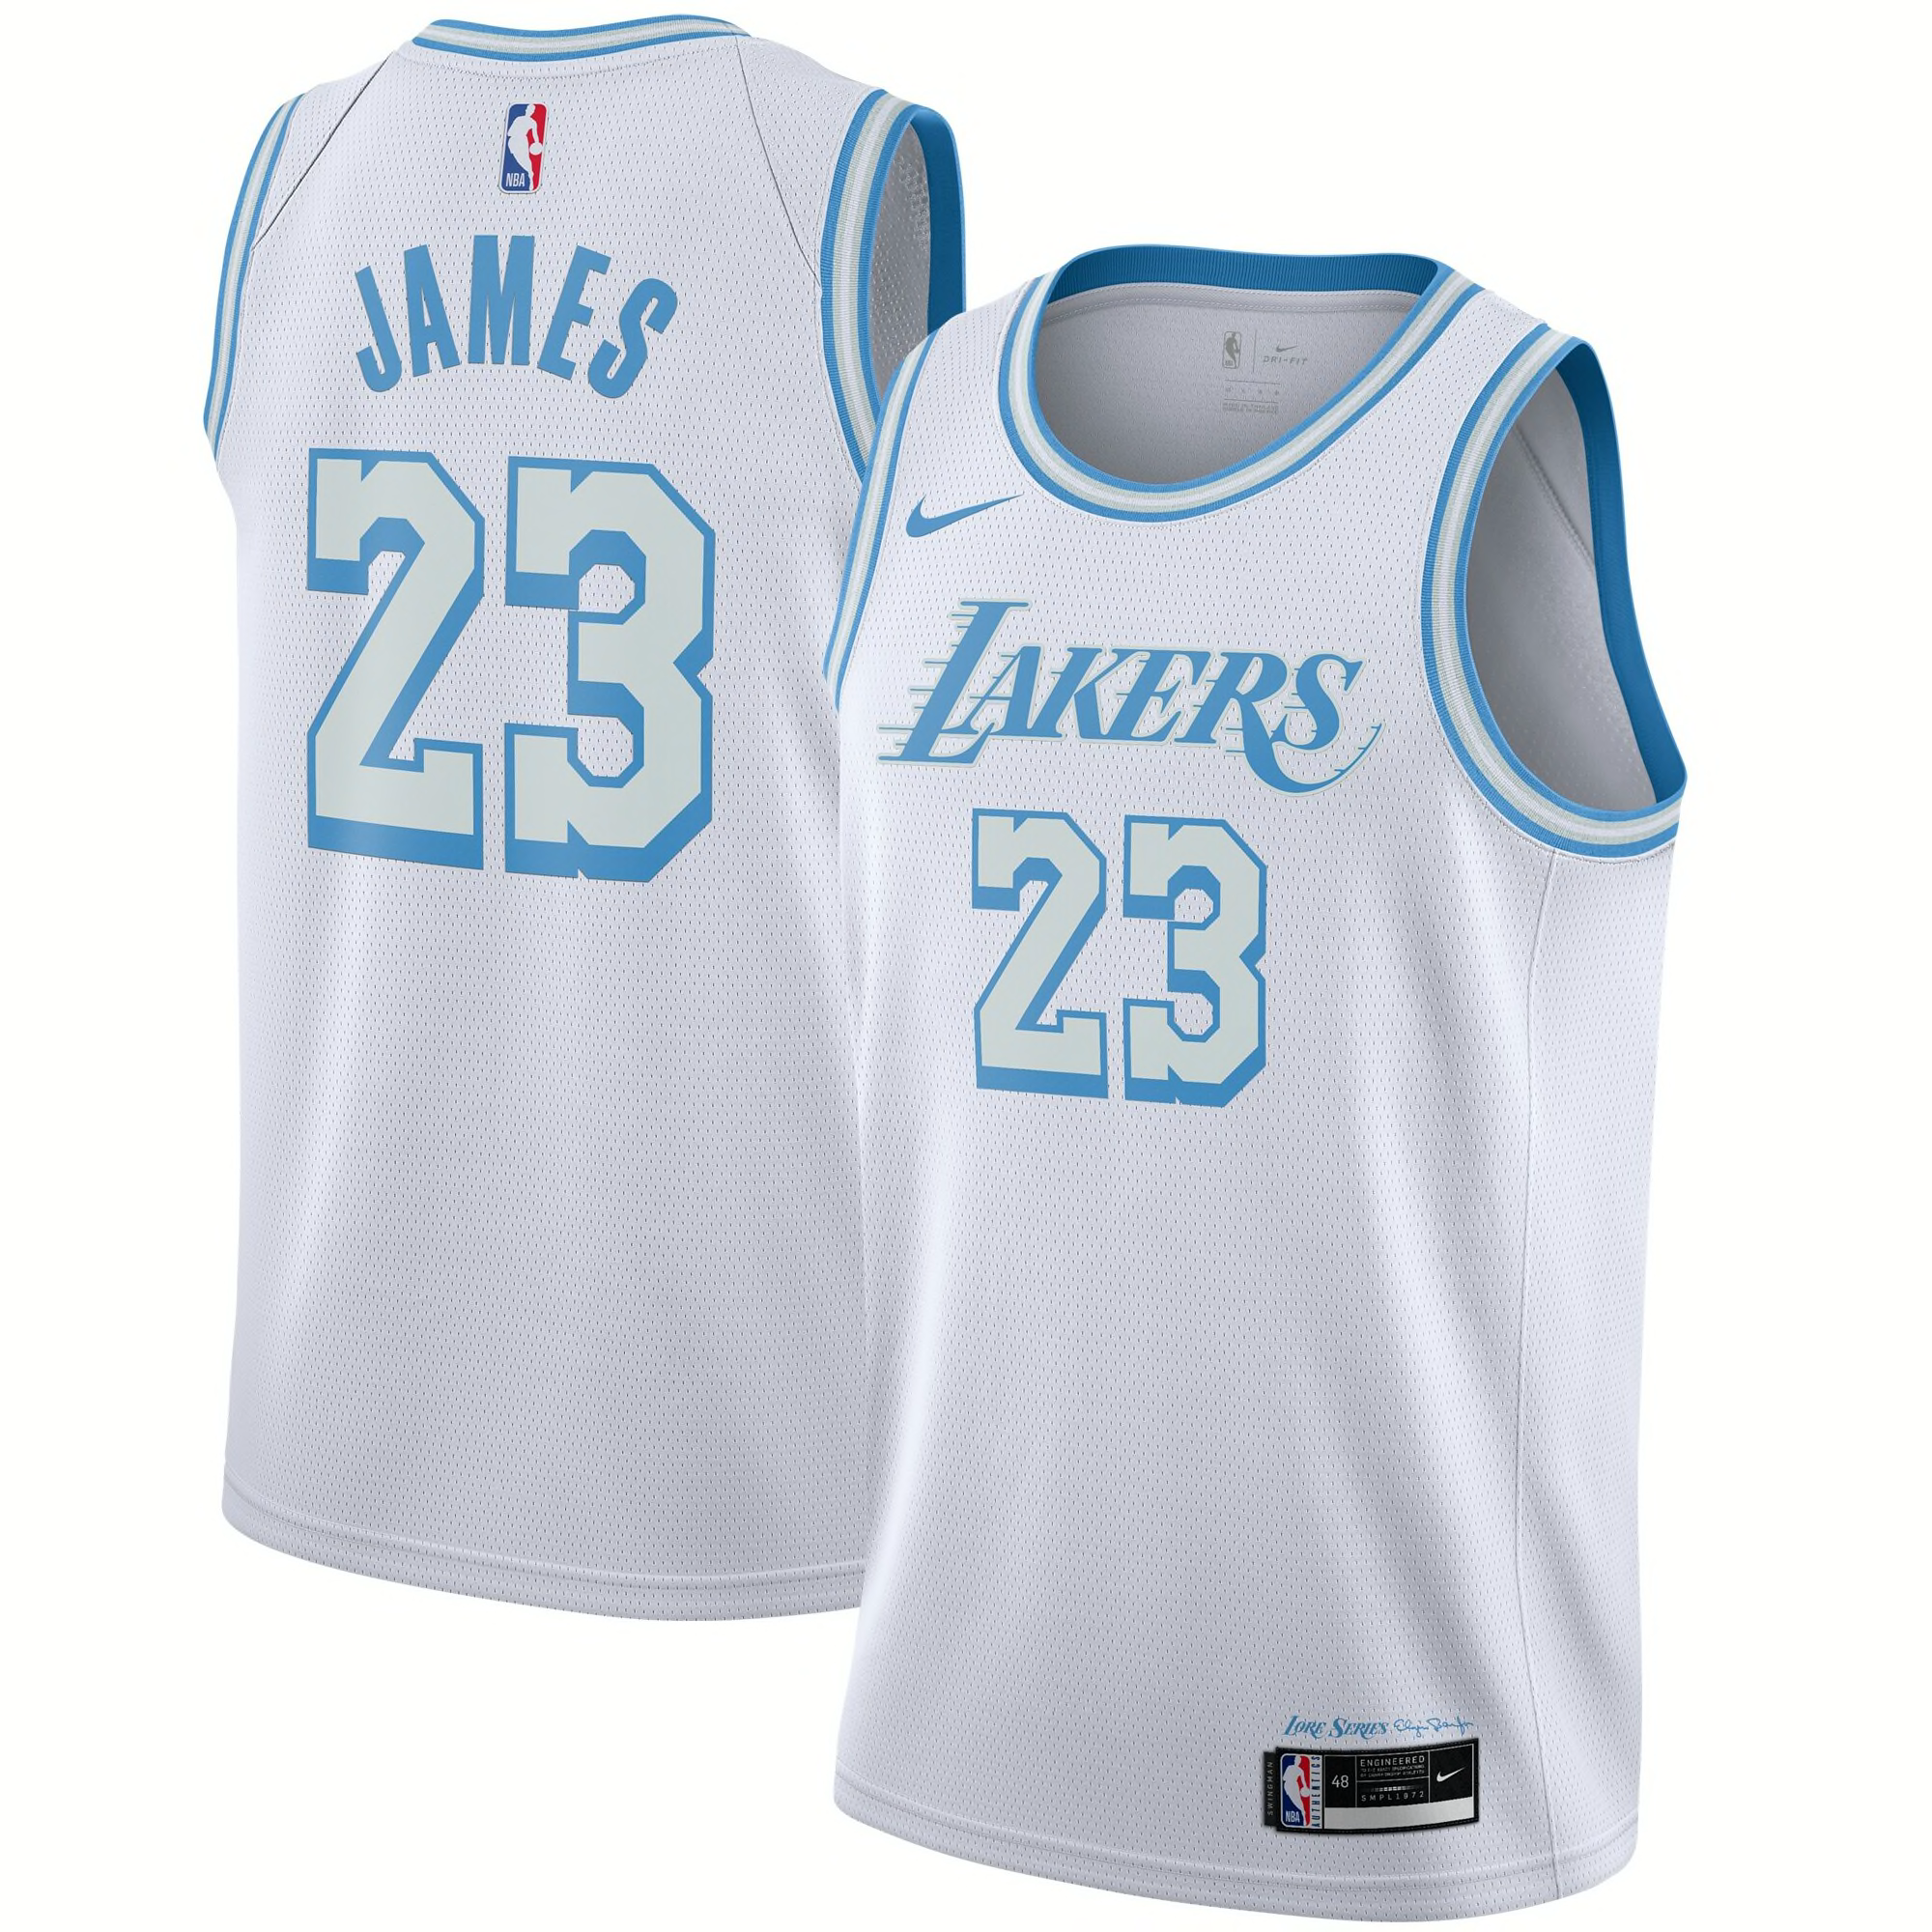 lakers jersey black friday sale